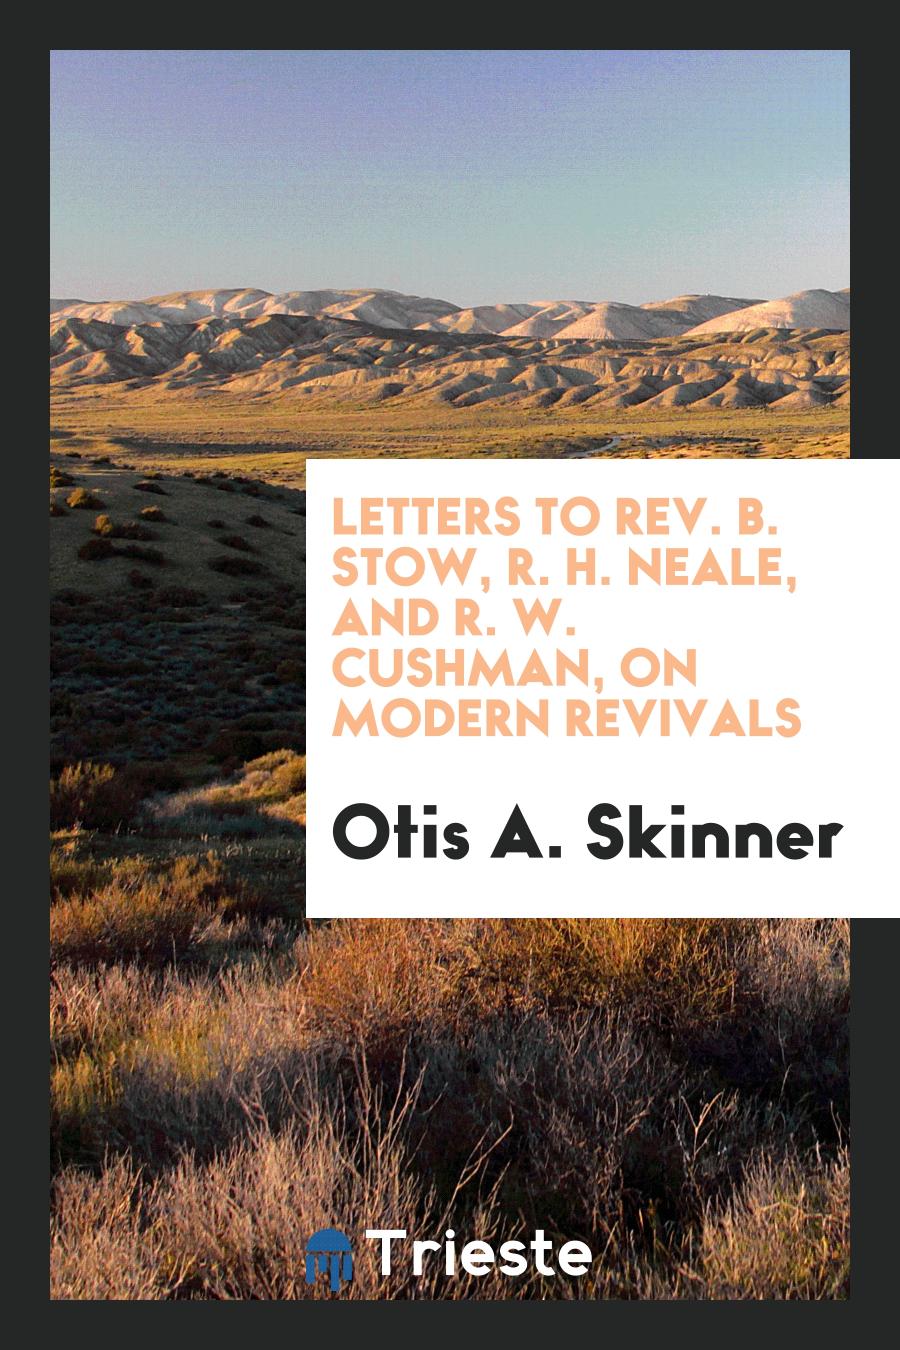 Letters to Rev. B. Stow, R. H. Neale, and R. W. Cushman, on Modern Revivals